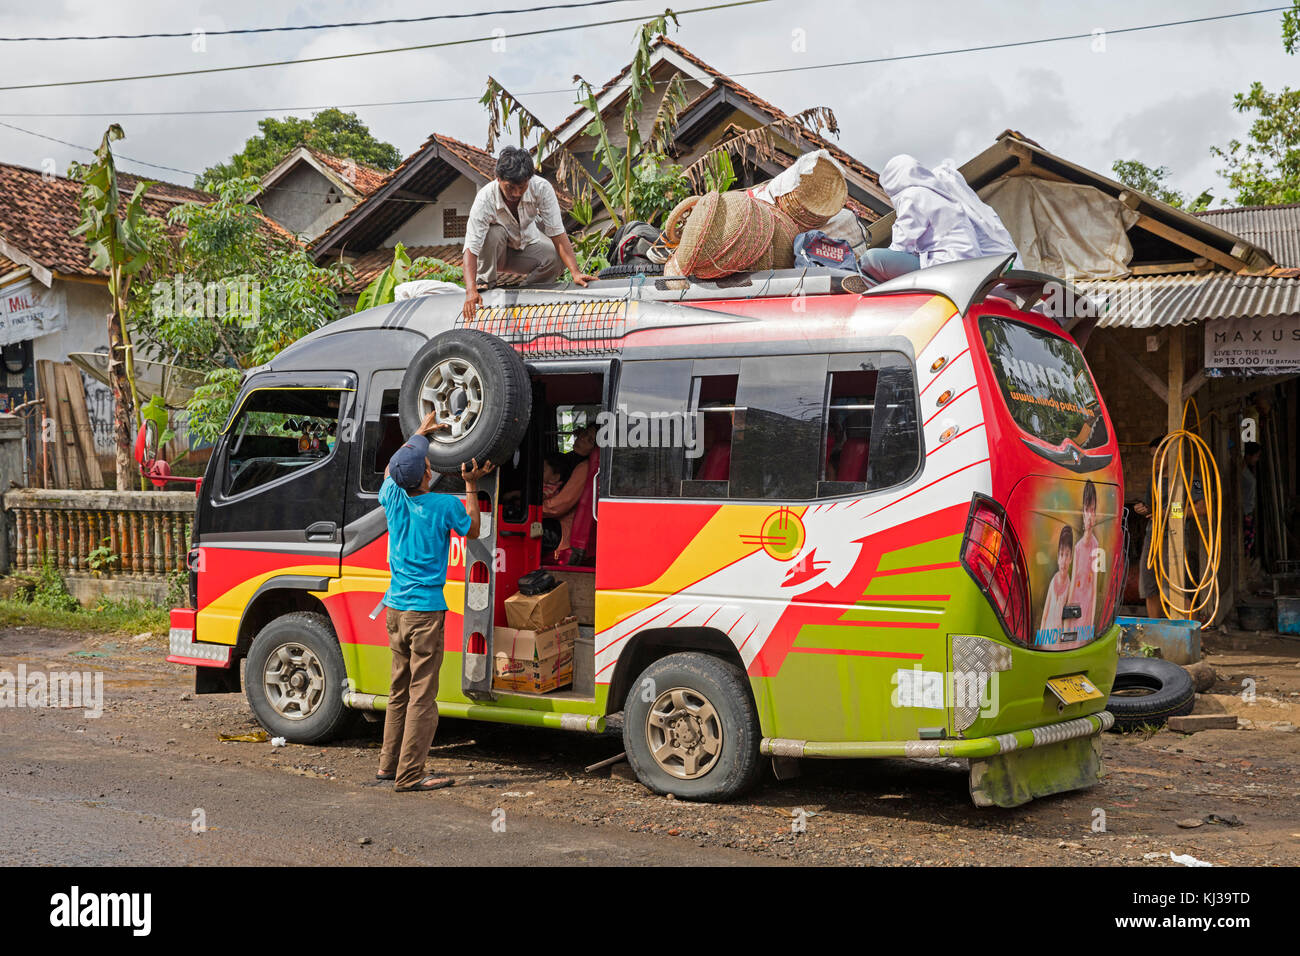 Minibus from Labuan to Tamanyaya being loaded, public transport in Java, Indonesia Stock Photo